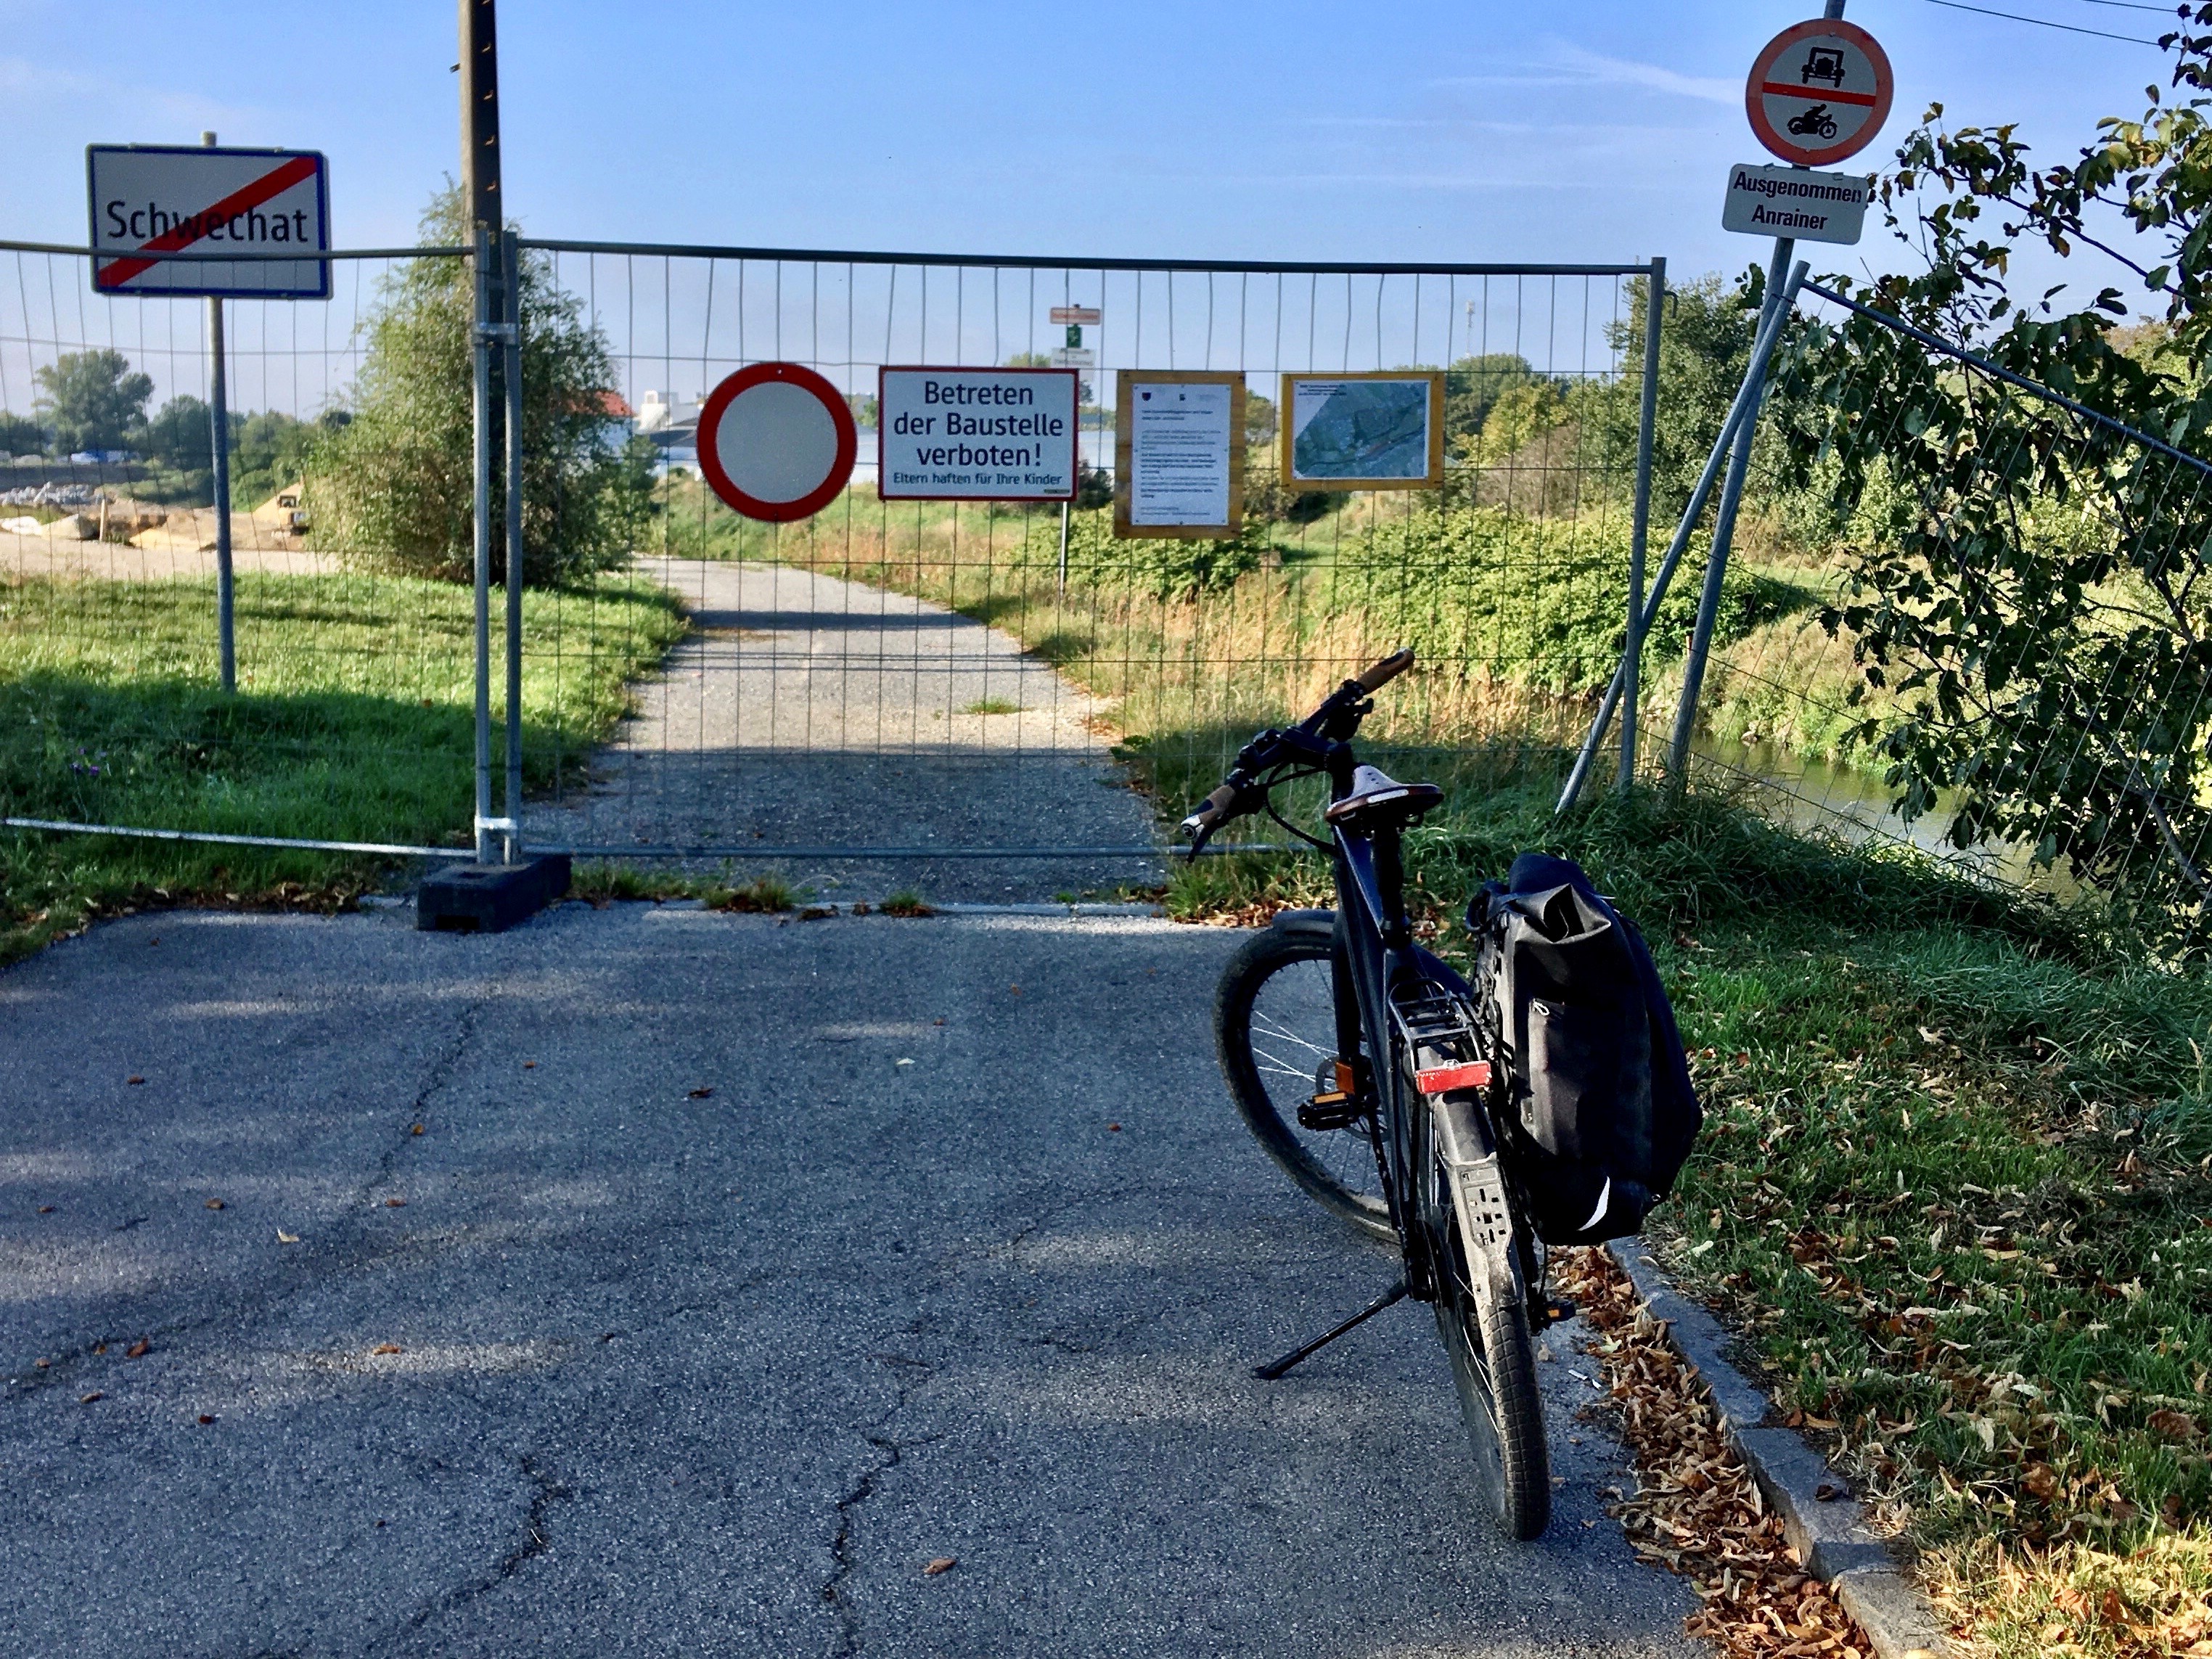 Bicycle in fron of closed gate